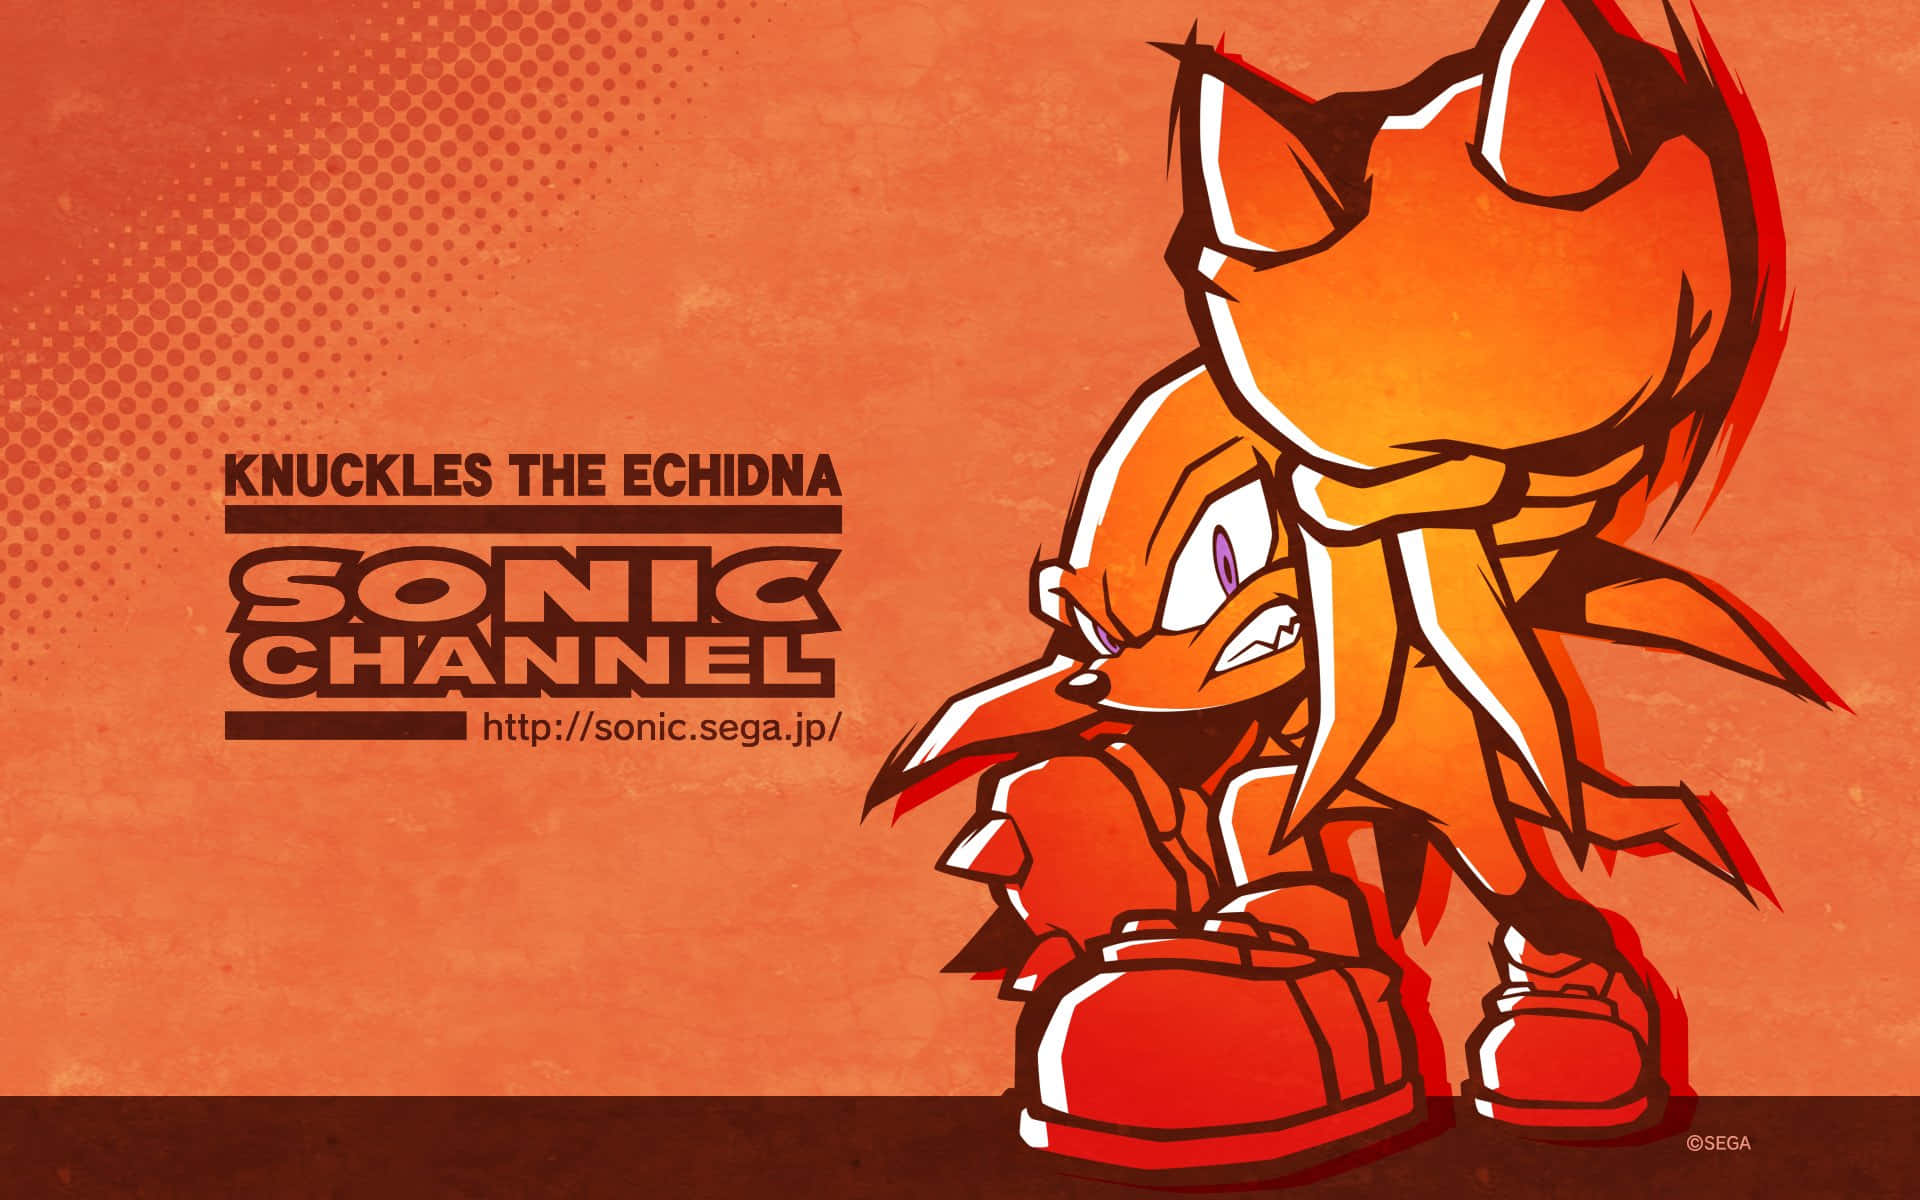 Knuckles The Echidna From Sonic The Hedgehog Background